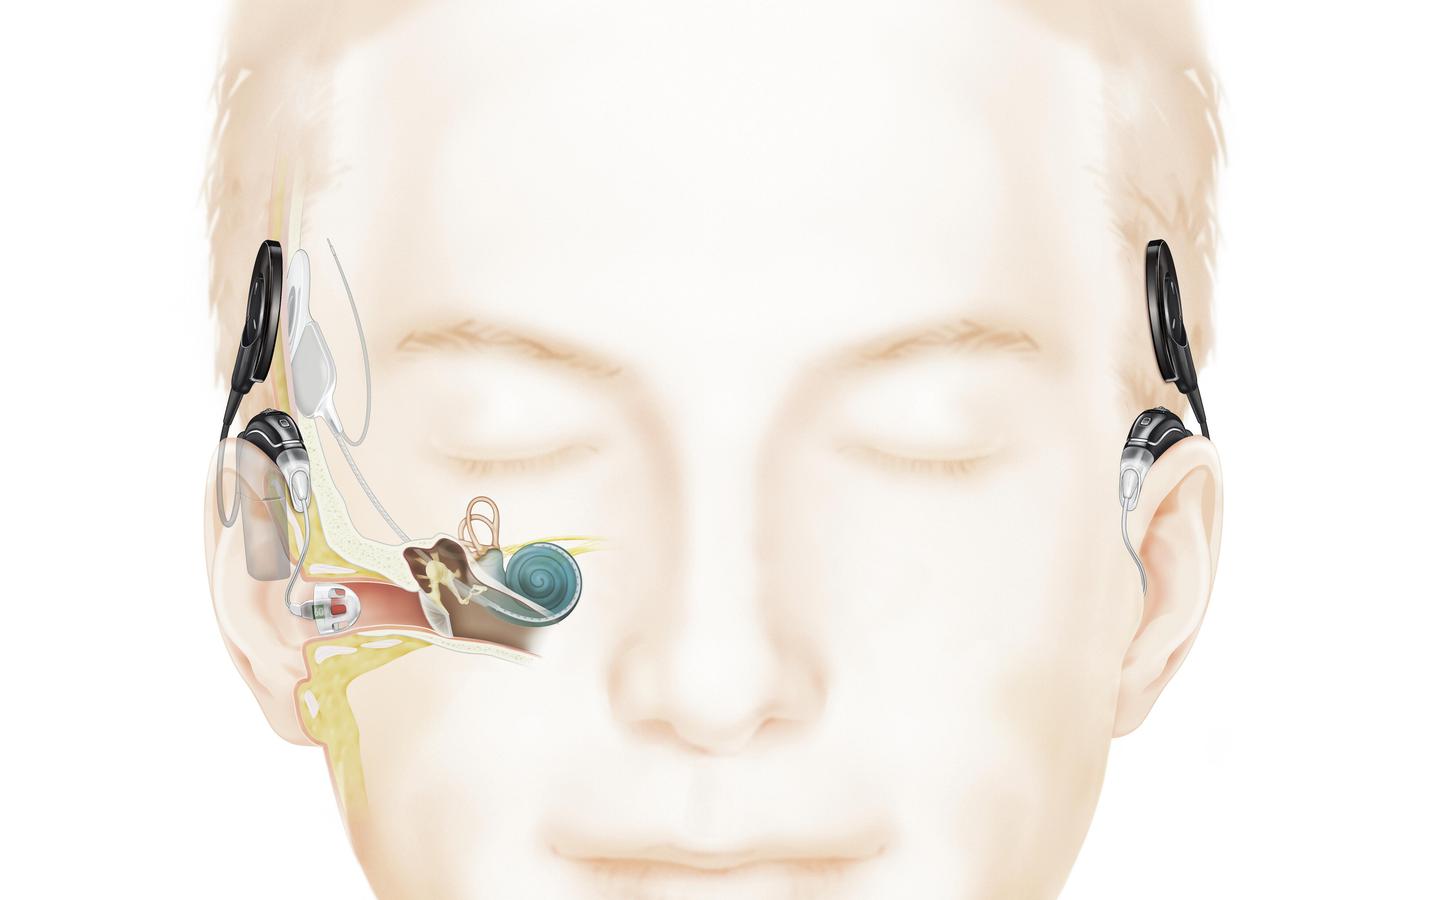 Cochlear Implant How It Works video thumb.jpg